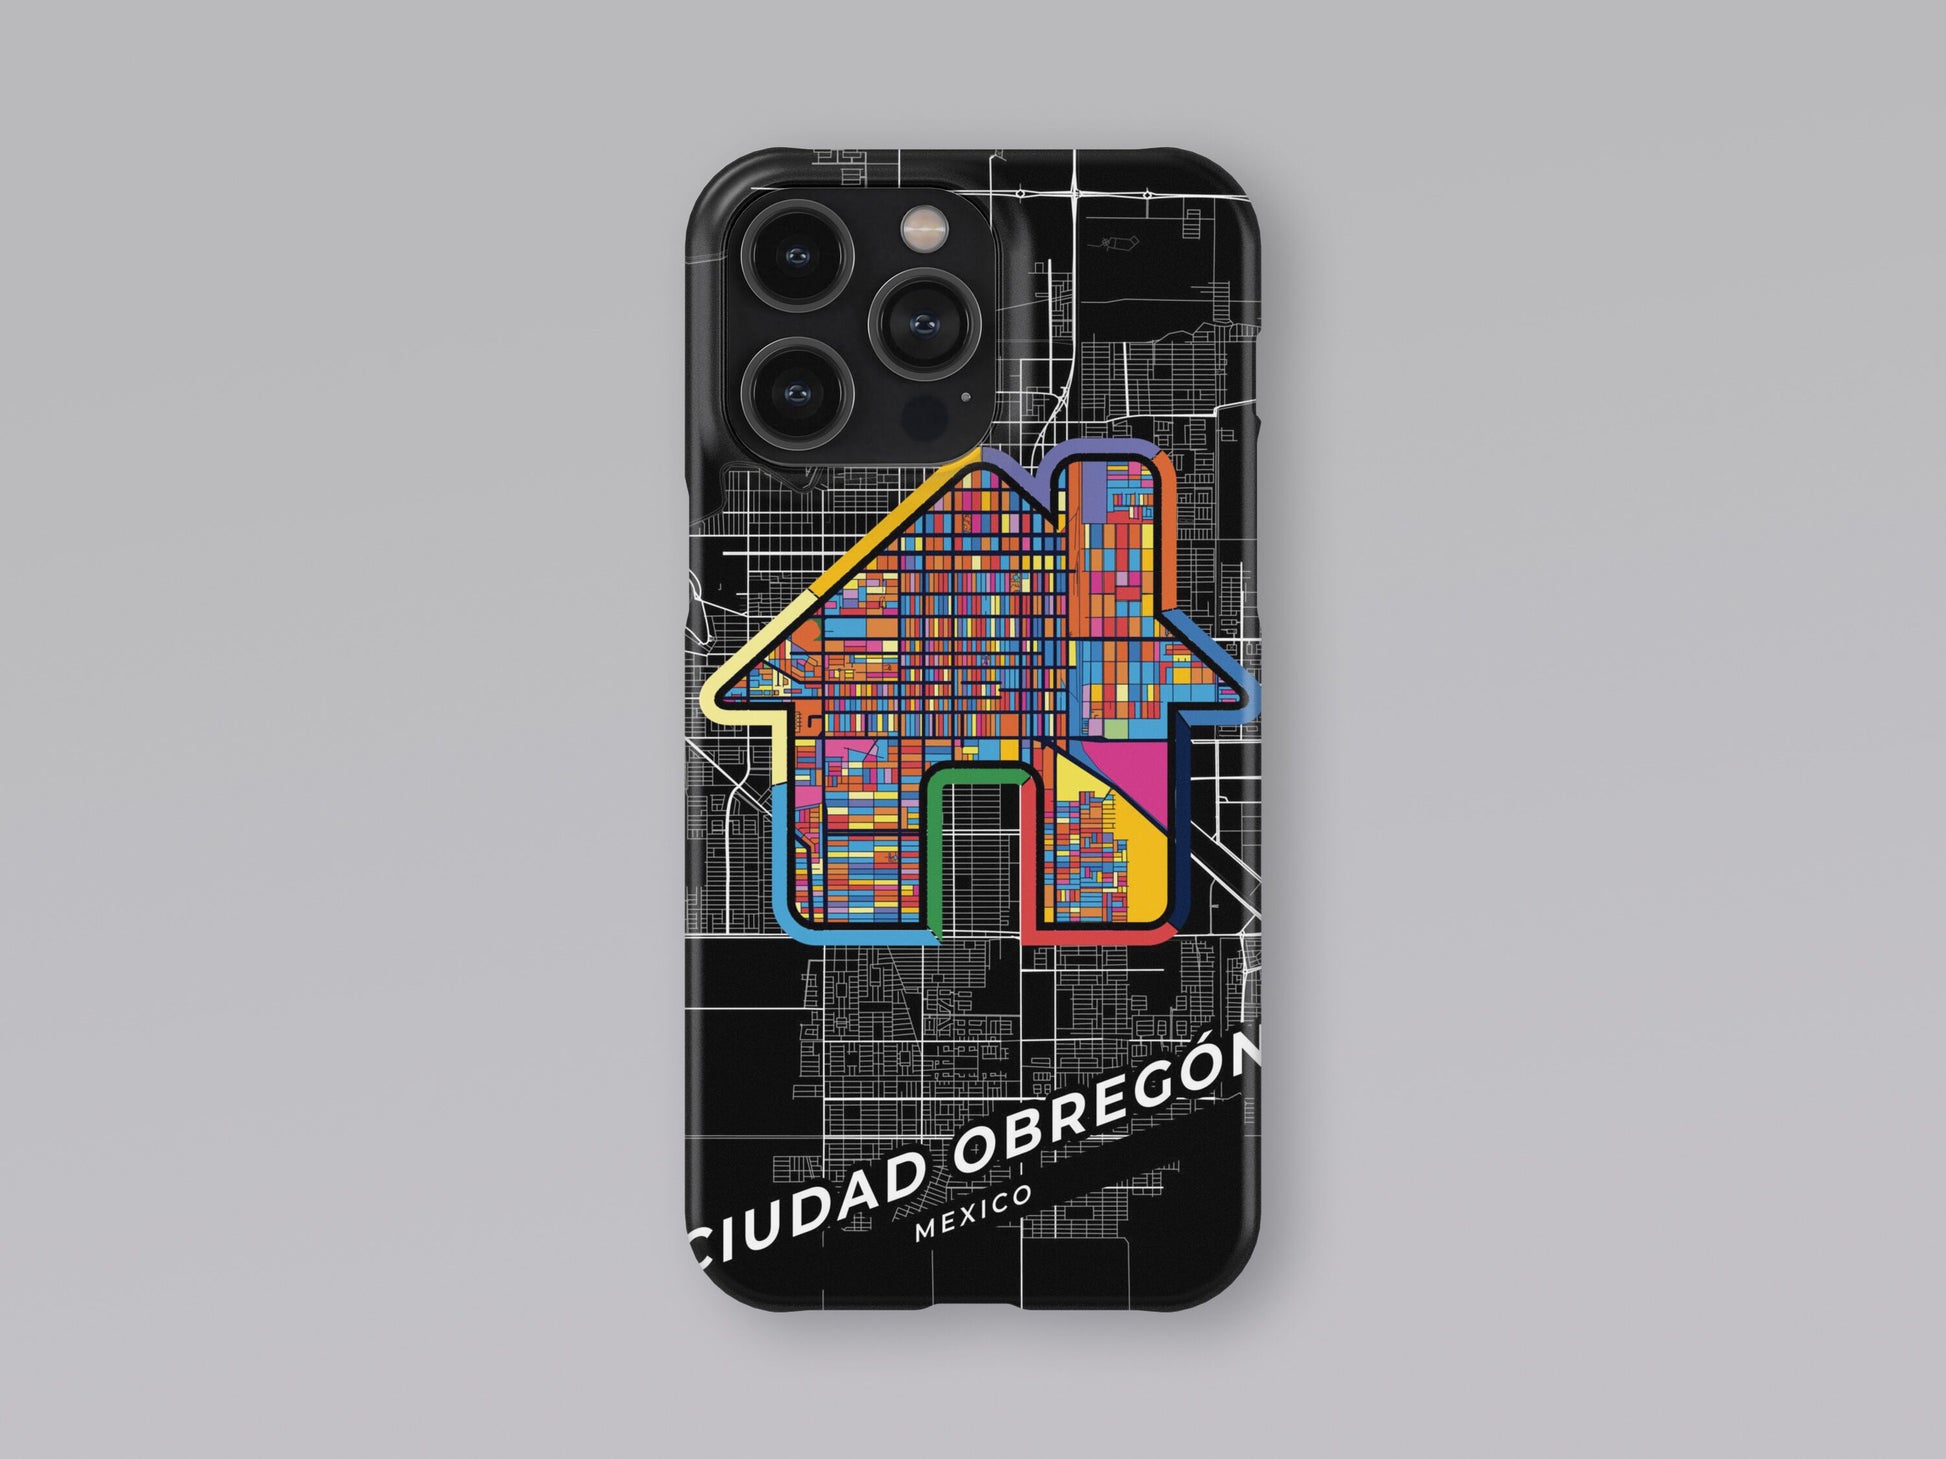 Ciudad Obregón Mexico slim phone case with colorful icon. Birthday, wedding or housewarming gift. Couple match cases. 3